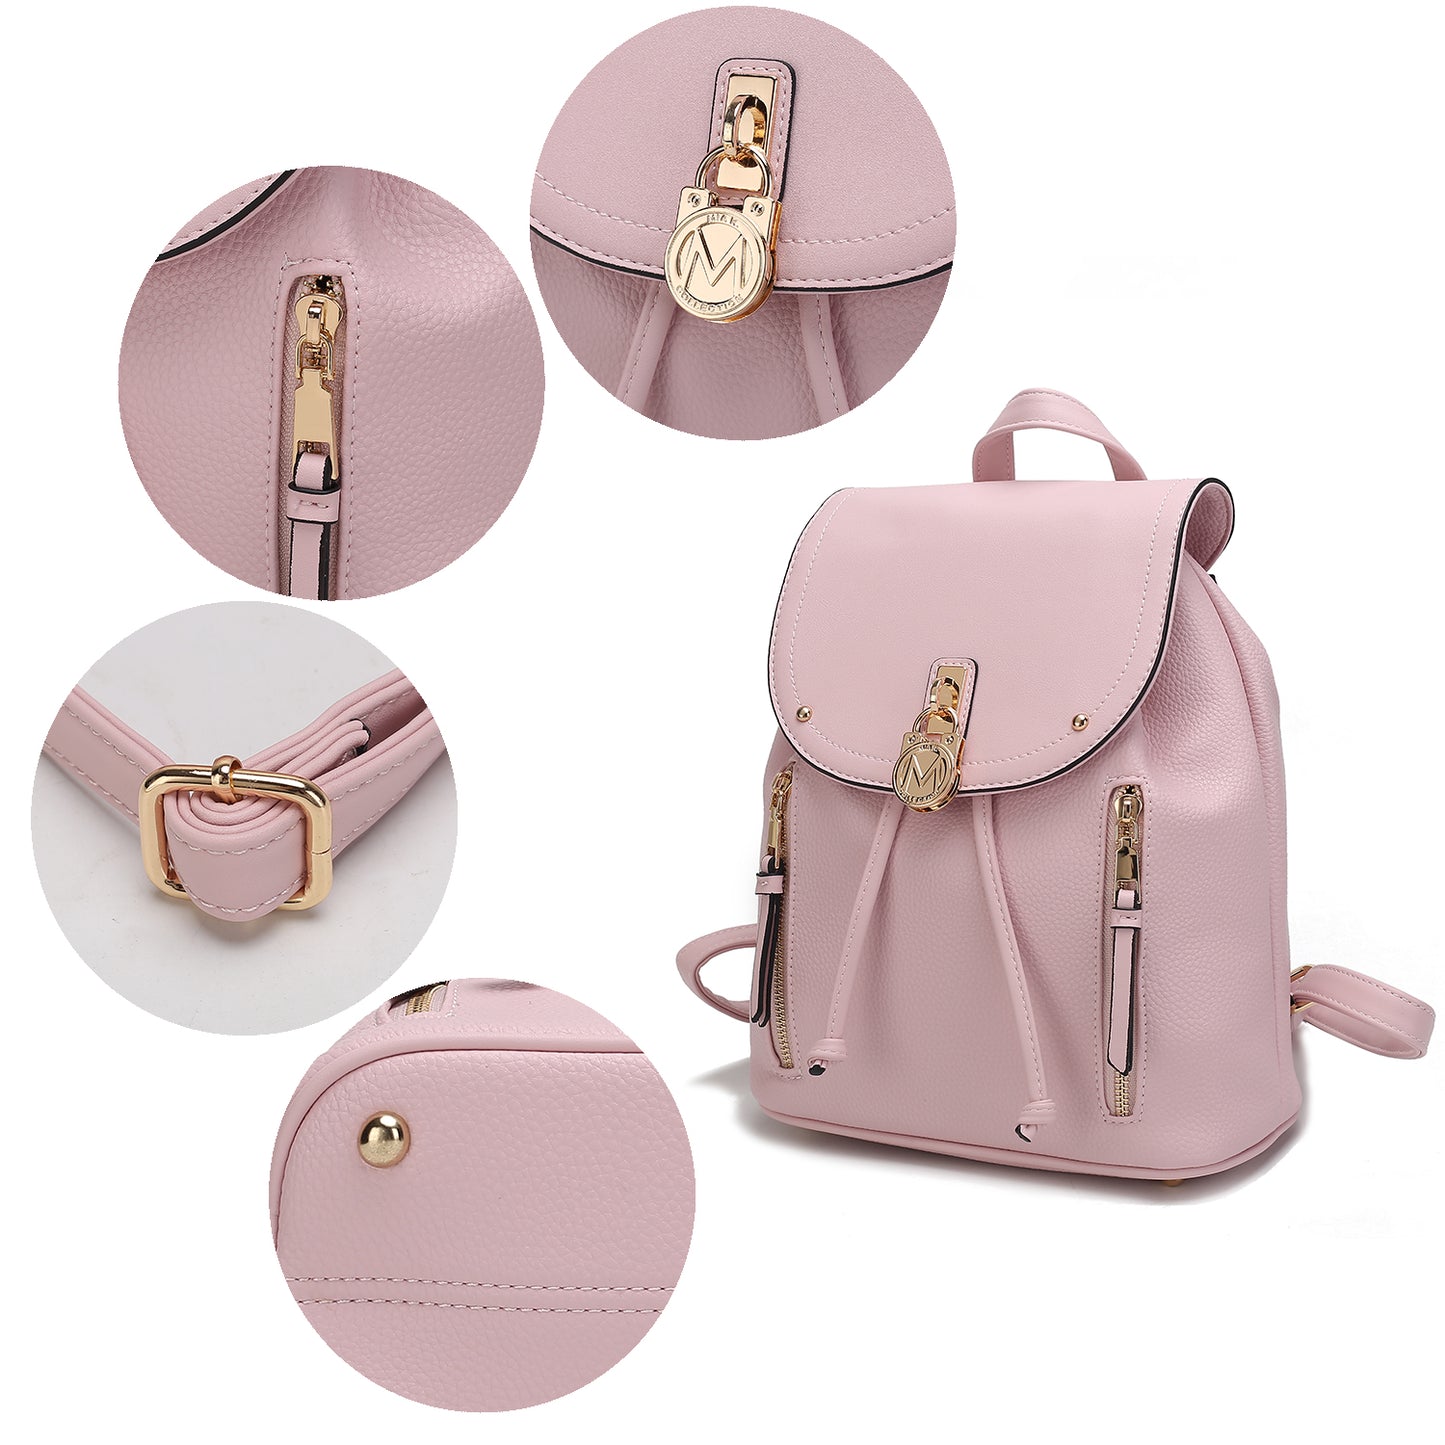 A Pink Orpheus Xandria vegan leather women backpack with gold buckles.